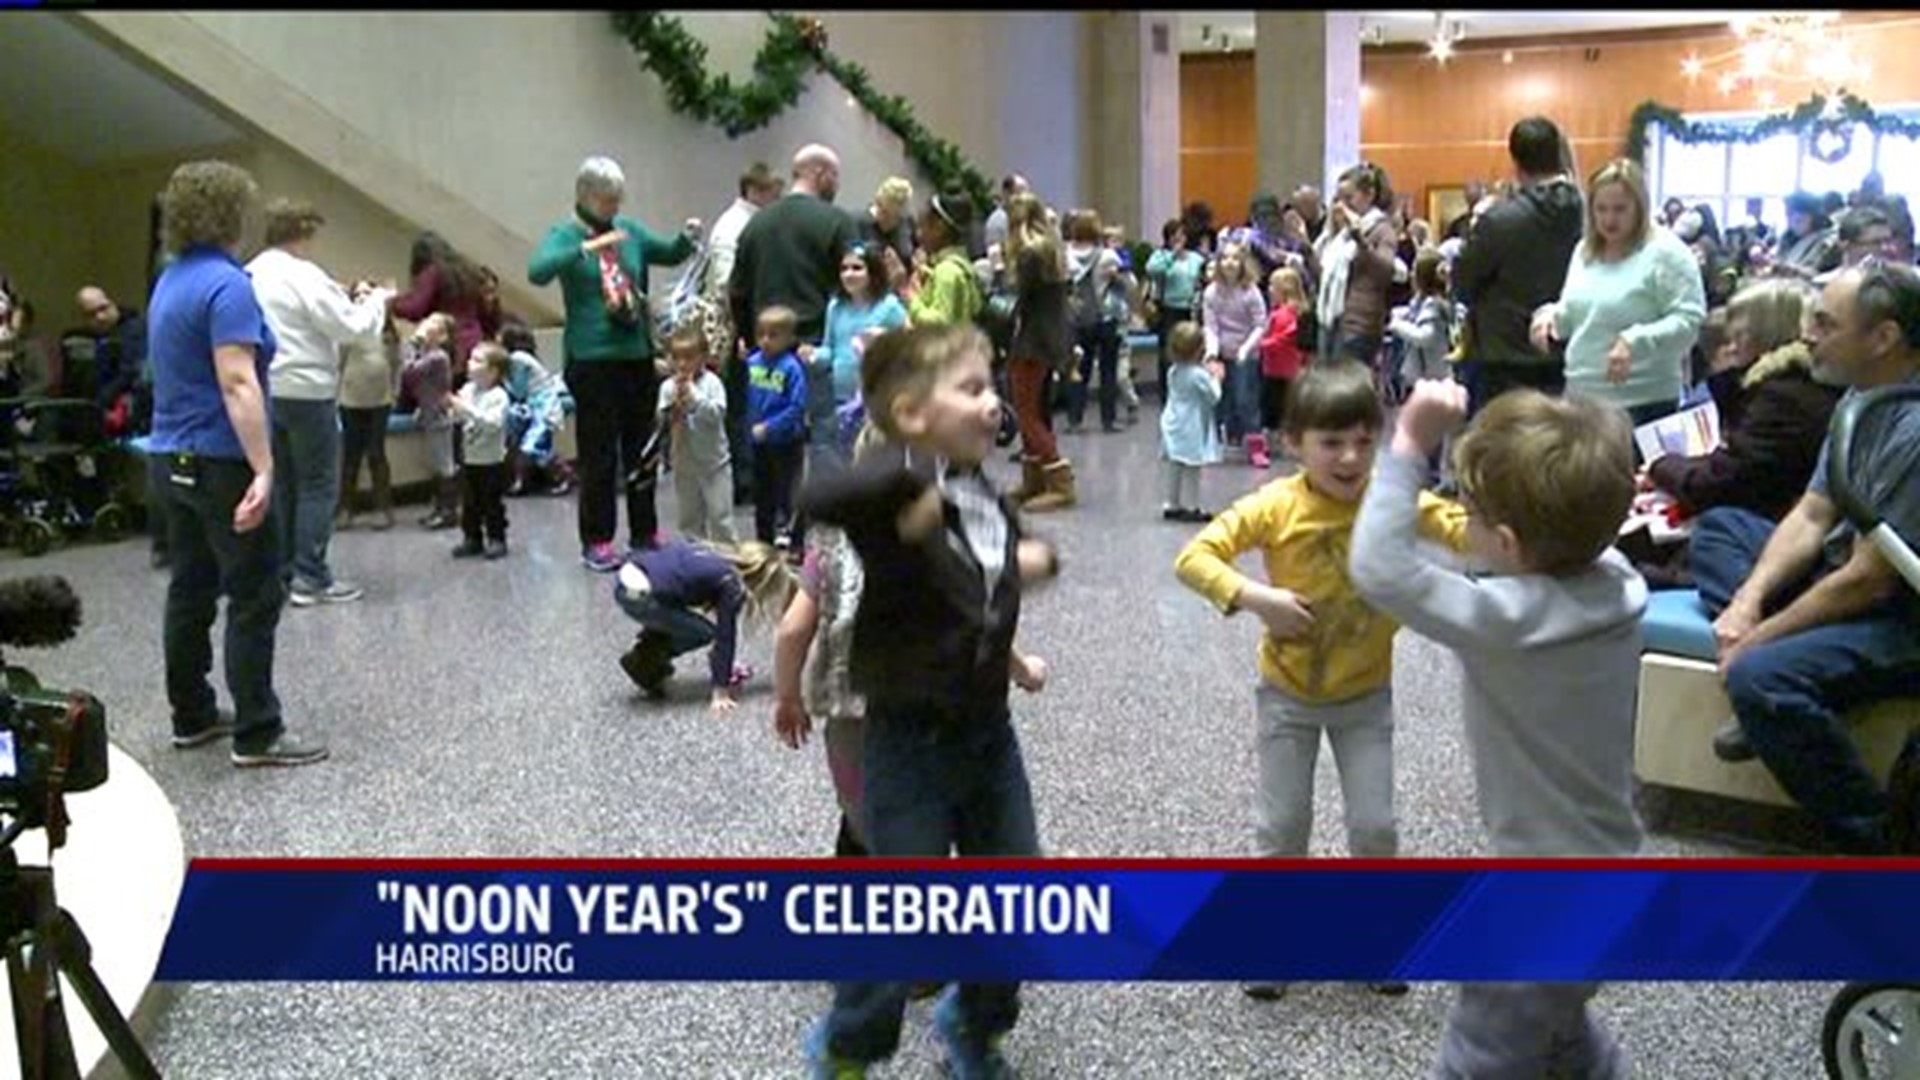 2017 arrive past your bedtime? Welcome to the "Noon Year"!